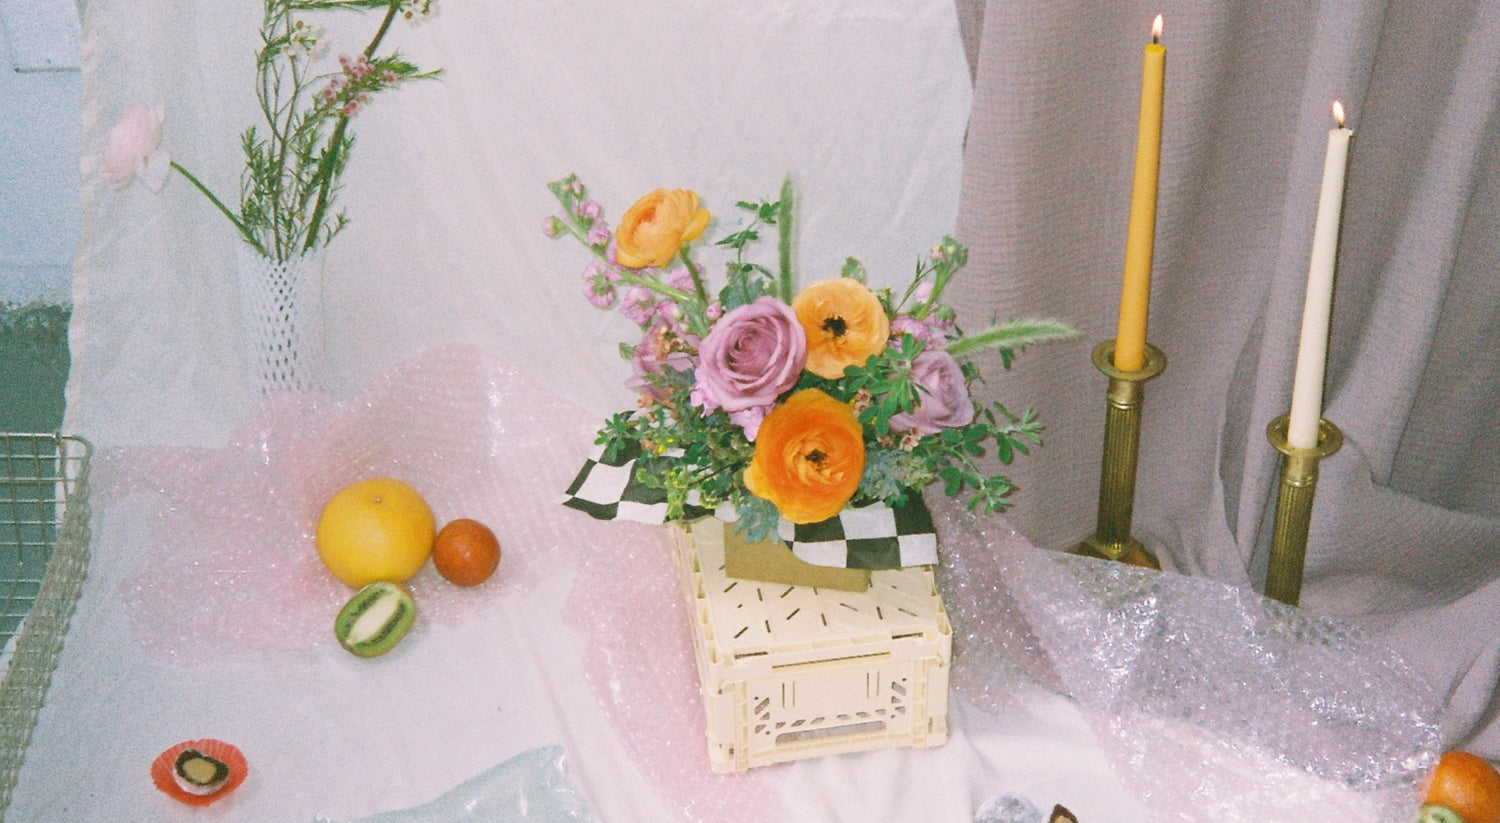 Tablescape featuring colorful bouquet by Bagel's Florals based in Albuquerque, New Mexico.